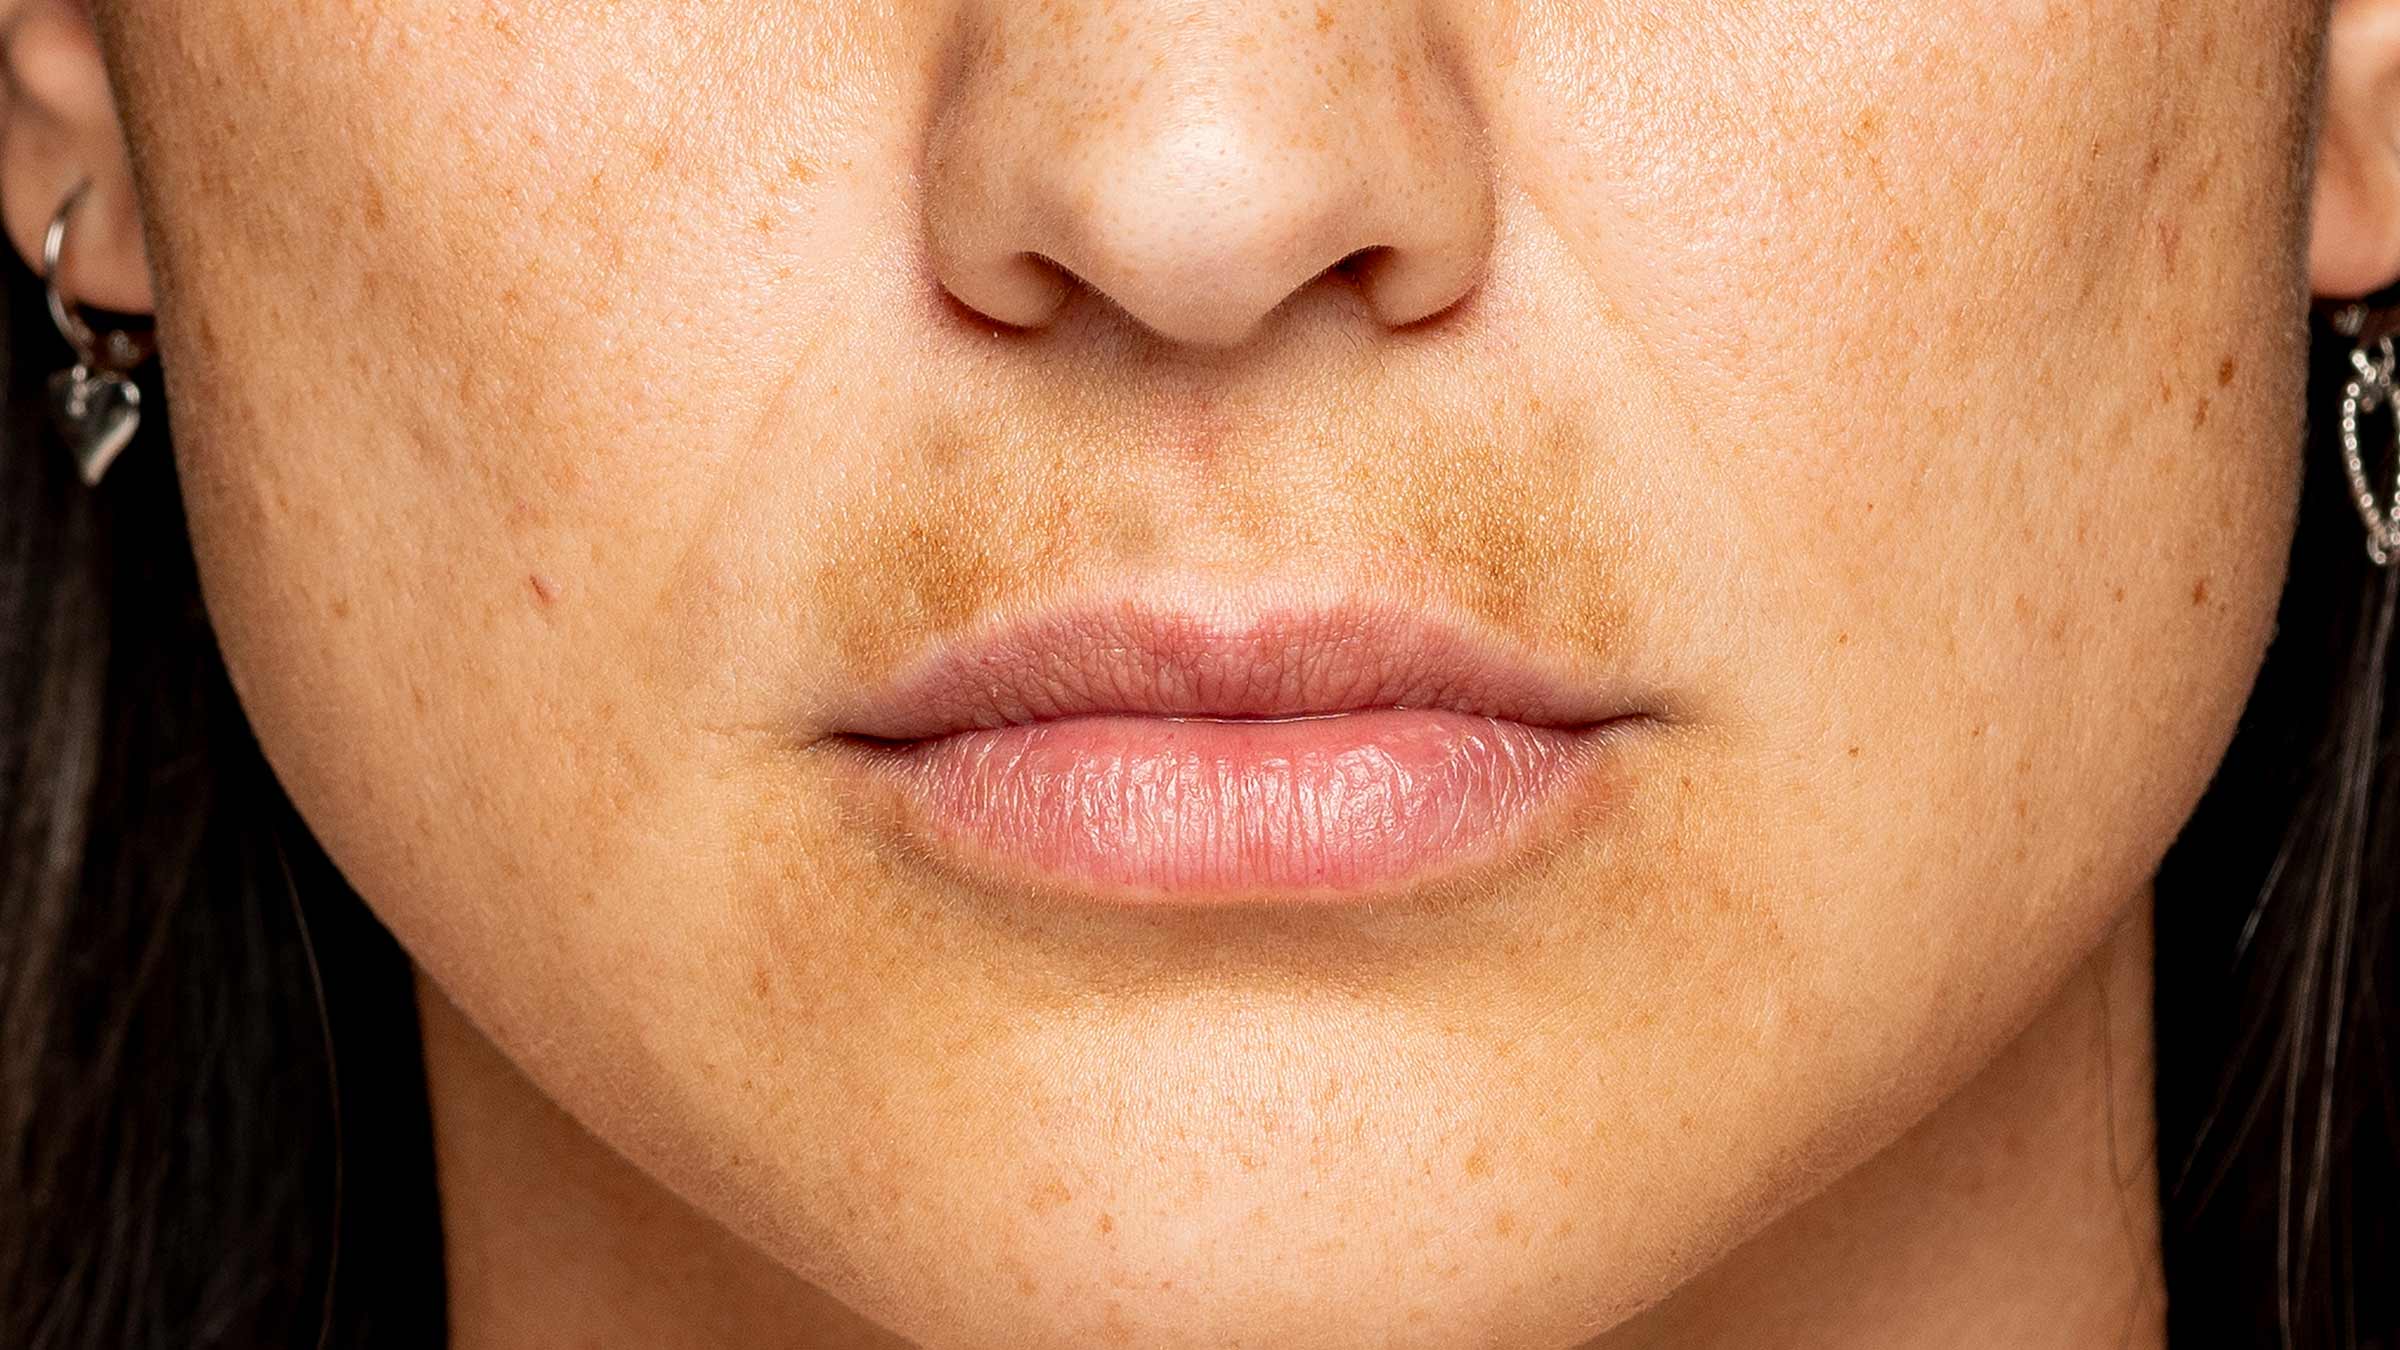 Spending time in the summer sun? You could develop skin discoloration called ‘melasma mustache’ 